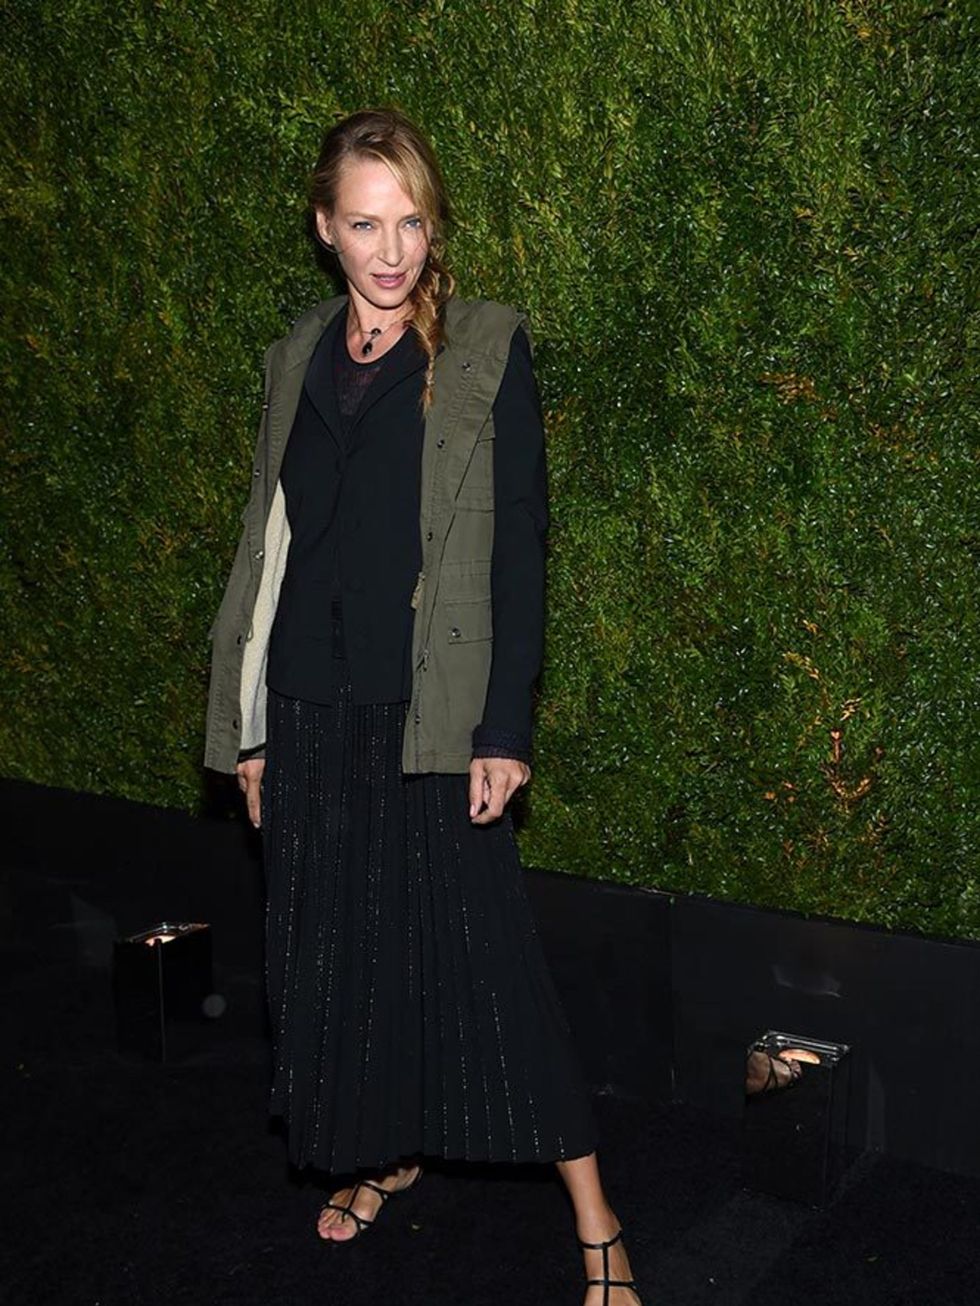 Uma Thurman attends the Chanel dinner during the Tribeca Film Fesitval 2015.